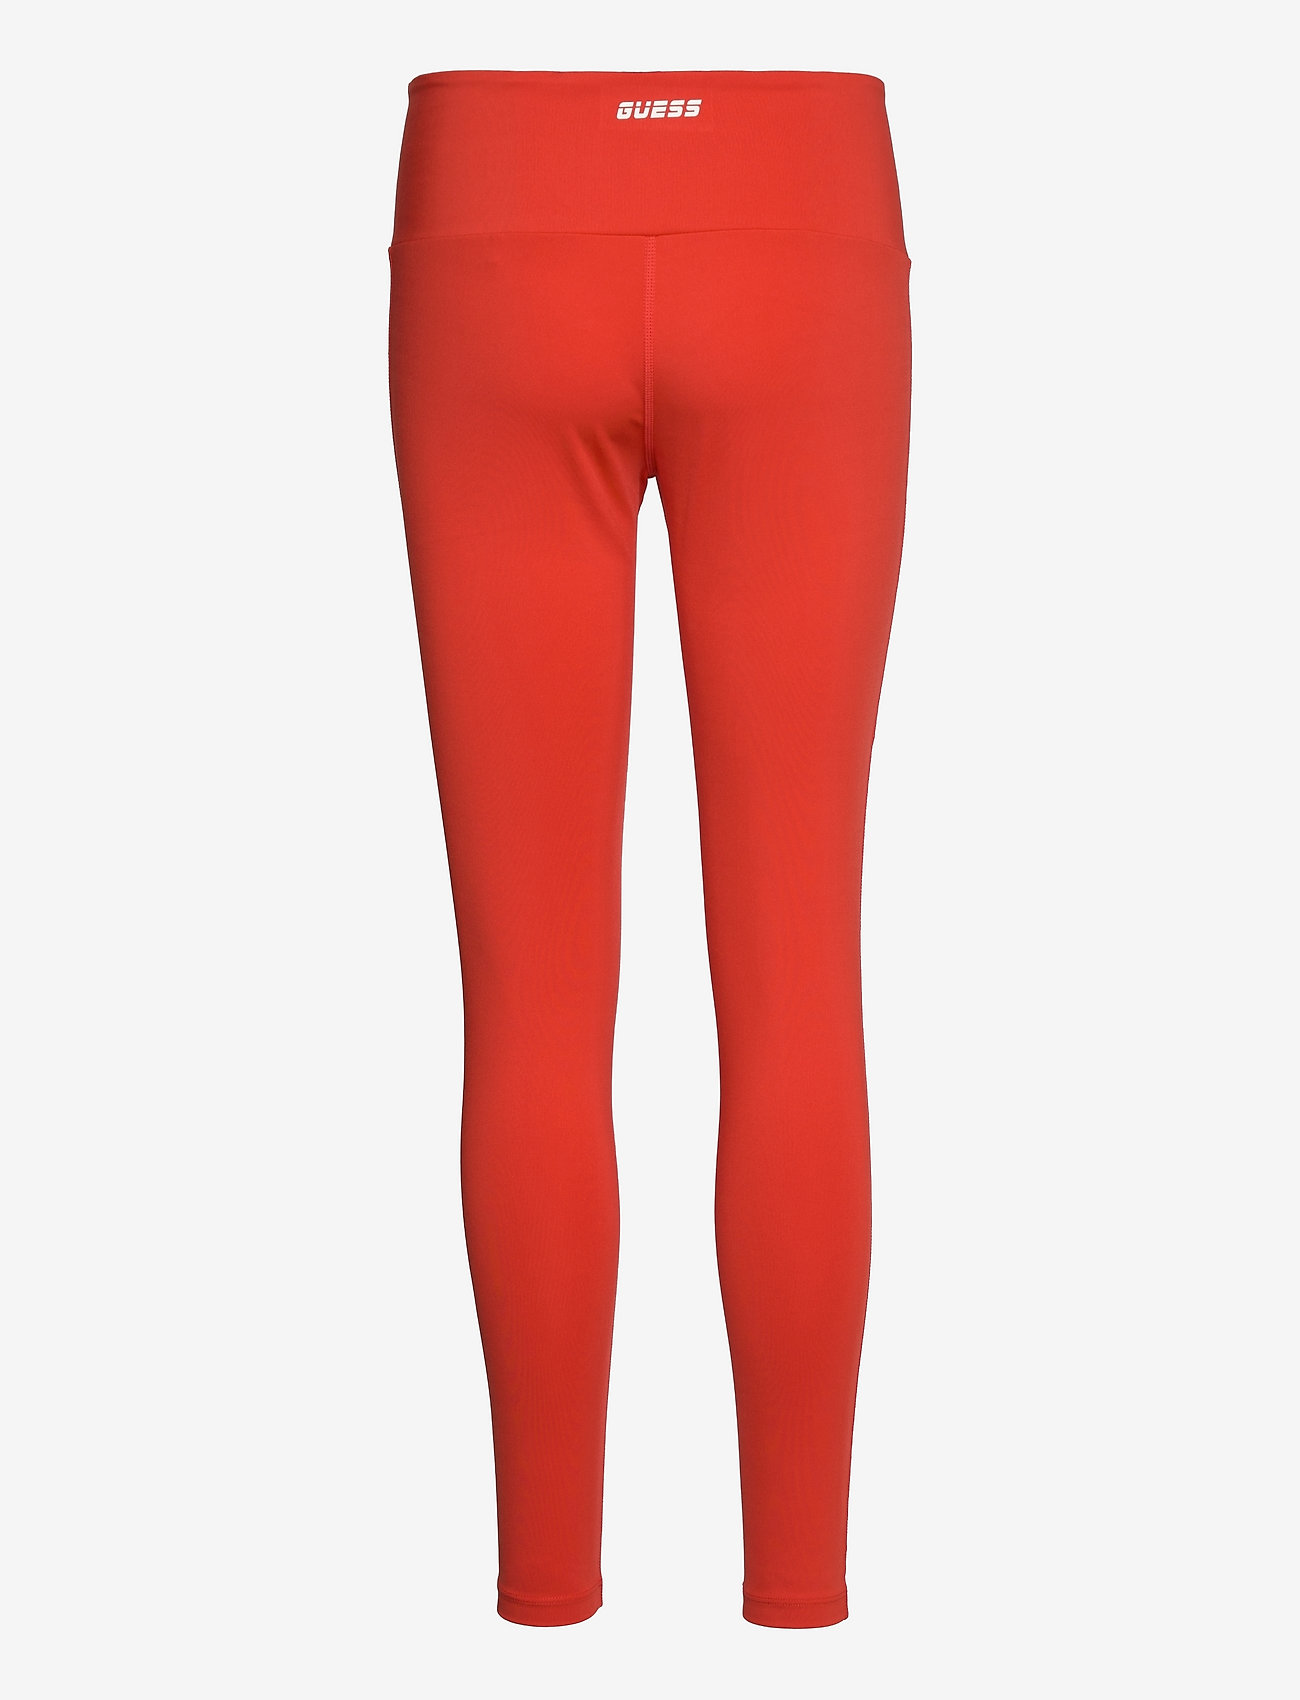 Guess Activewear - AGATHA LEGGINGS 4/4 - running & training tights - ardent red - 1